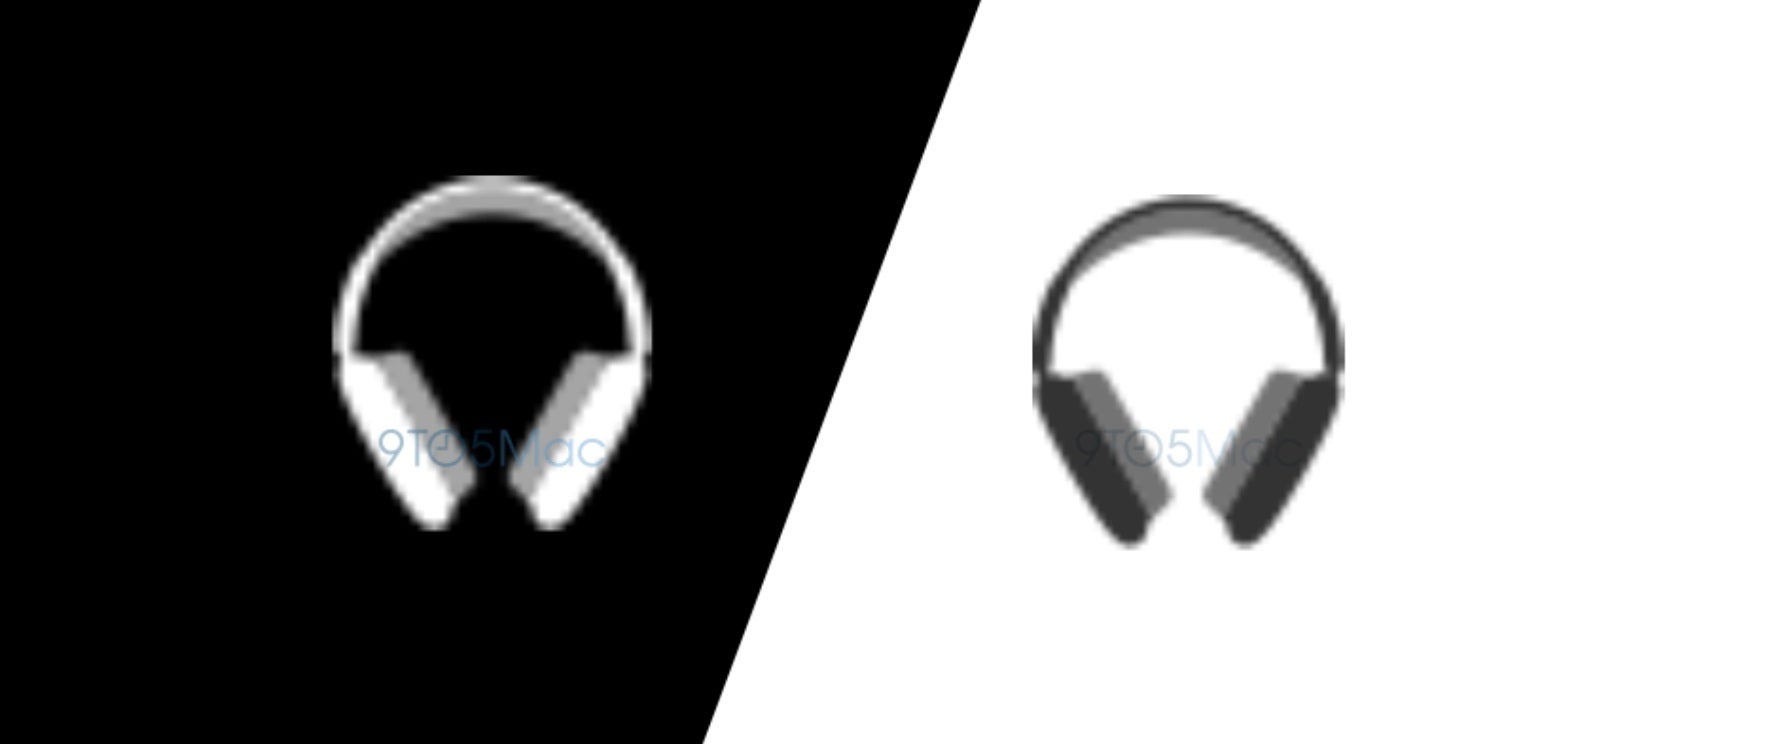 Icons found in iOS 14 code appears to show off Apple's new over-the-ears-Apple AirPods - Over-the-ear AirPods, more new Apple Watch features found hidden in iOS 14